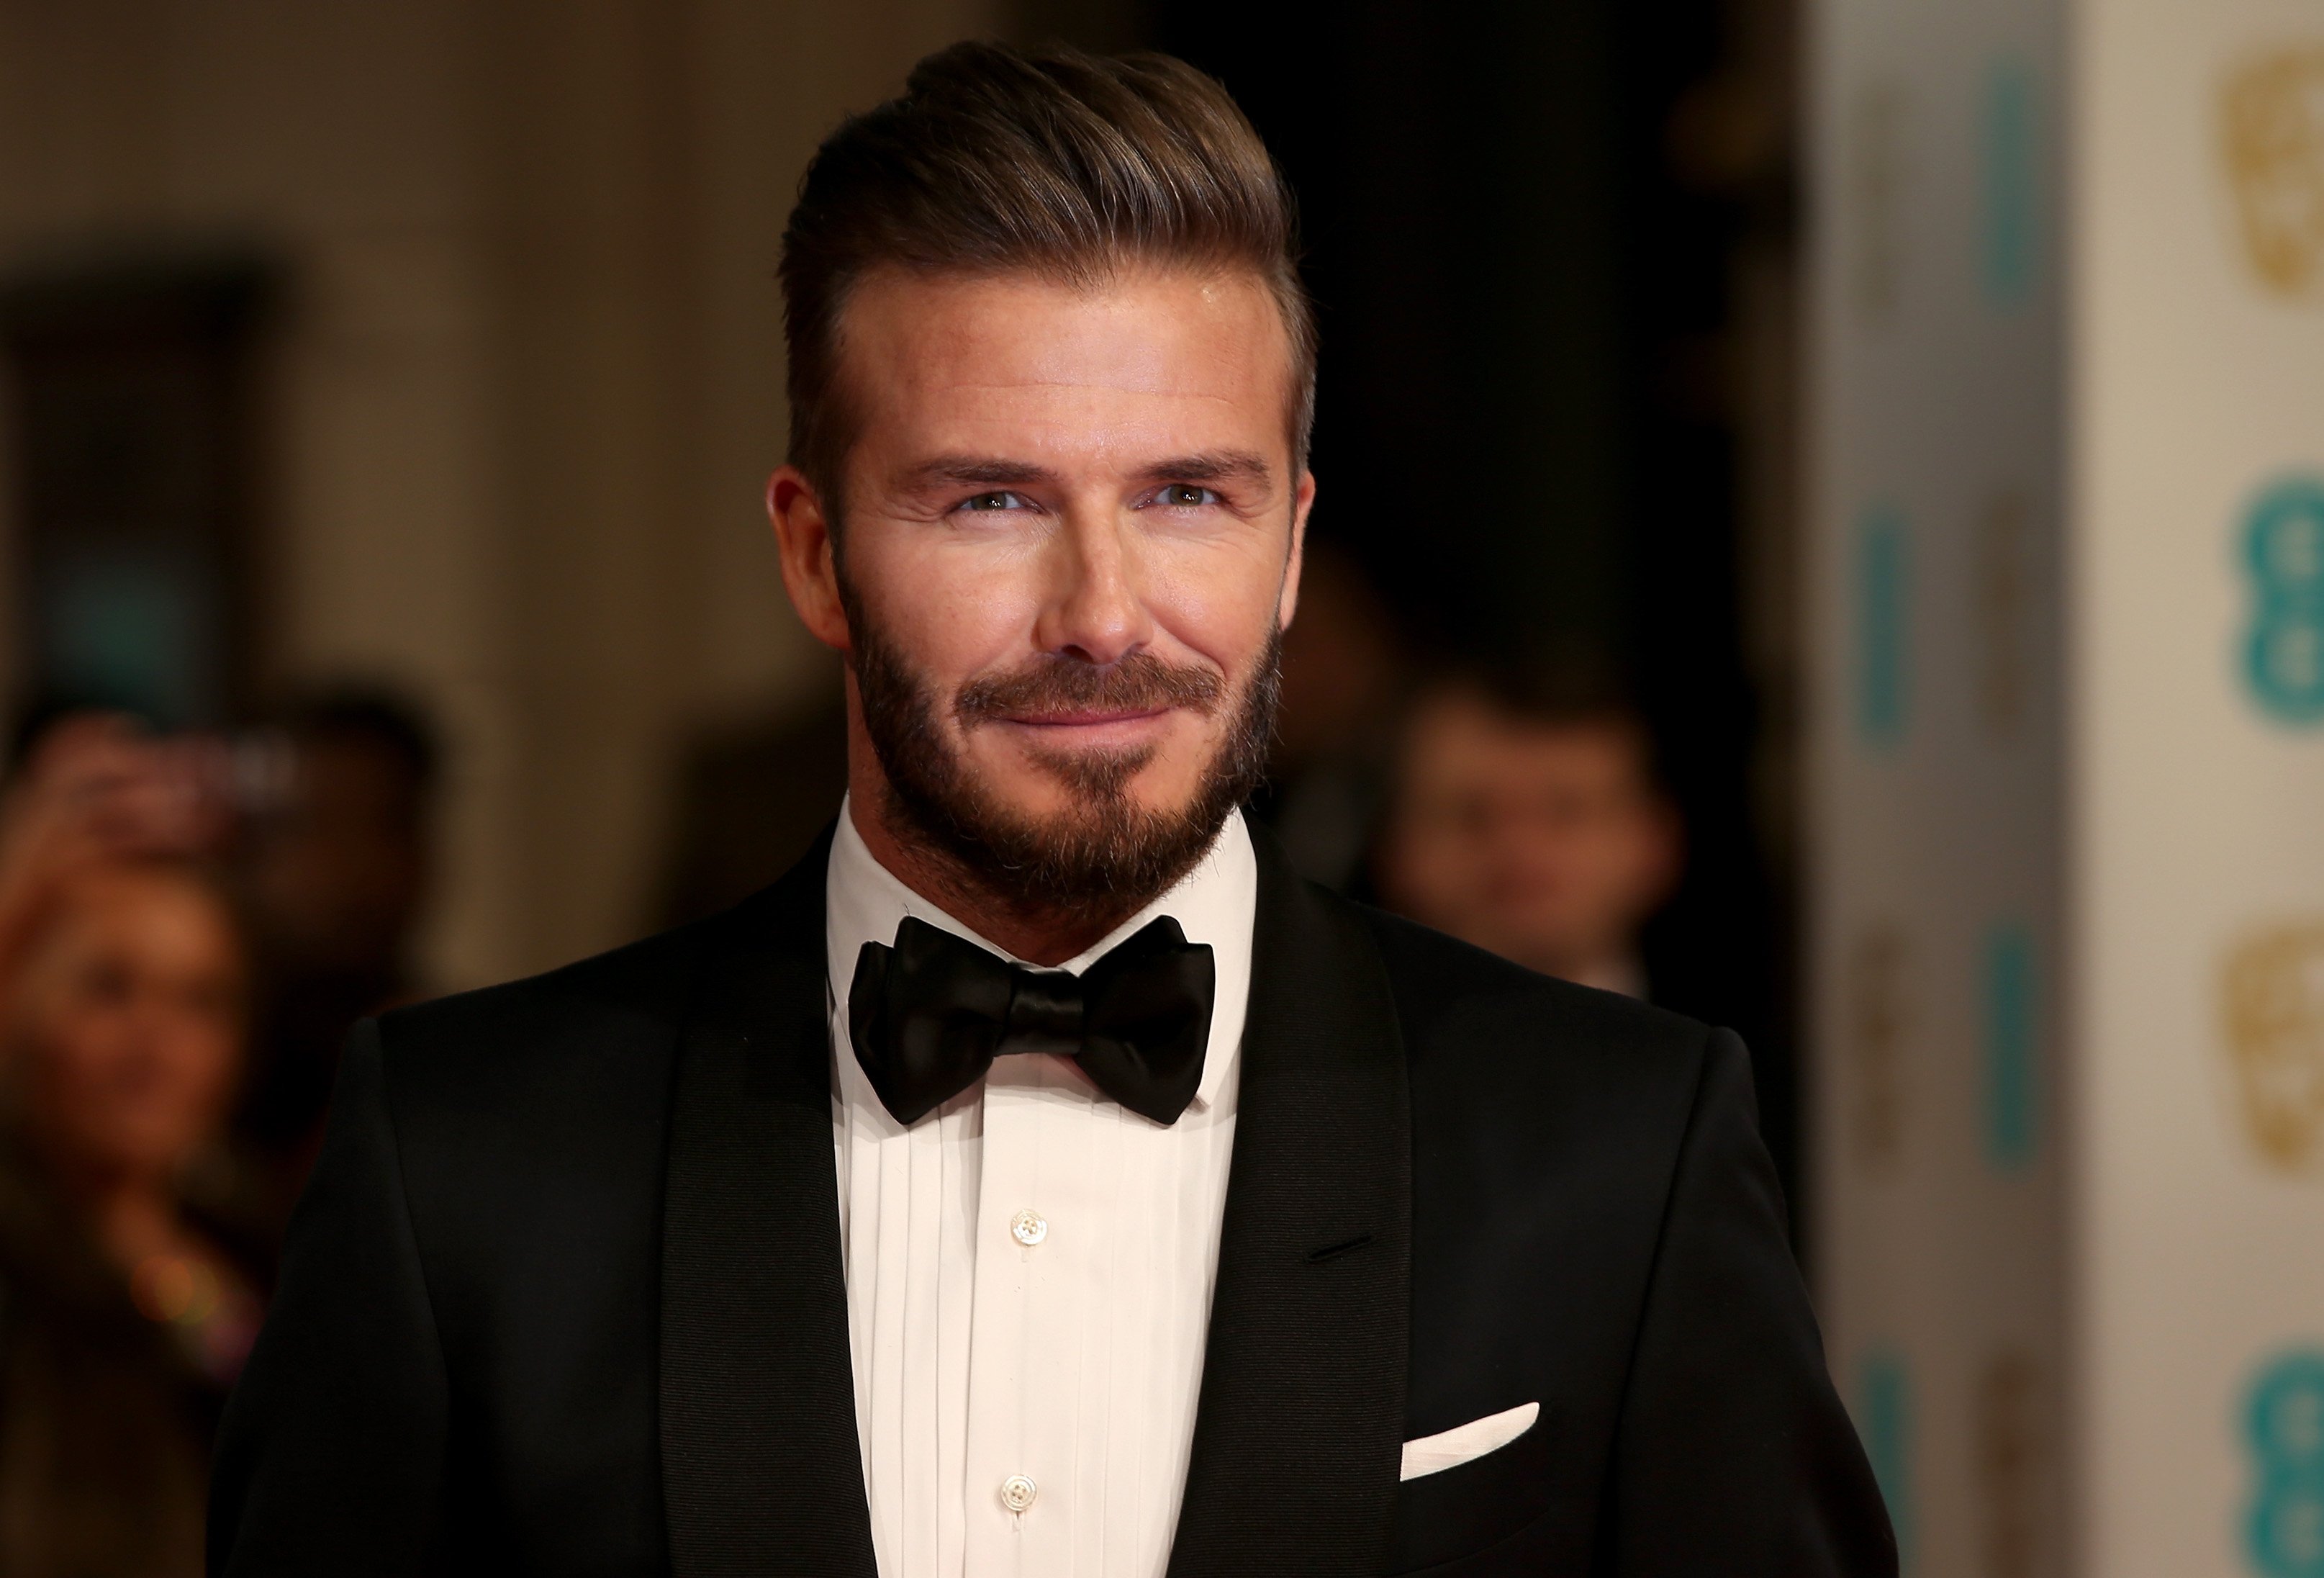 David Beckham at The Royal Opera House on February 8, 2015  | Photo: Getty Images